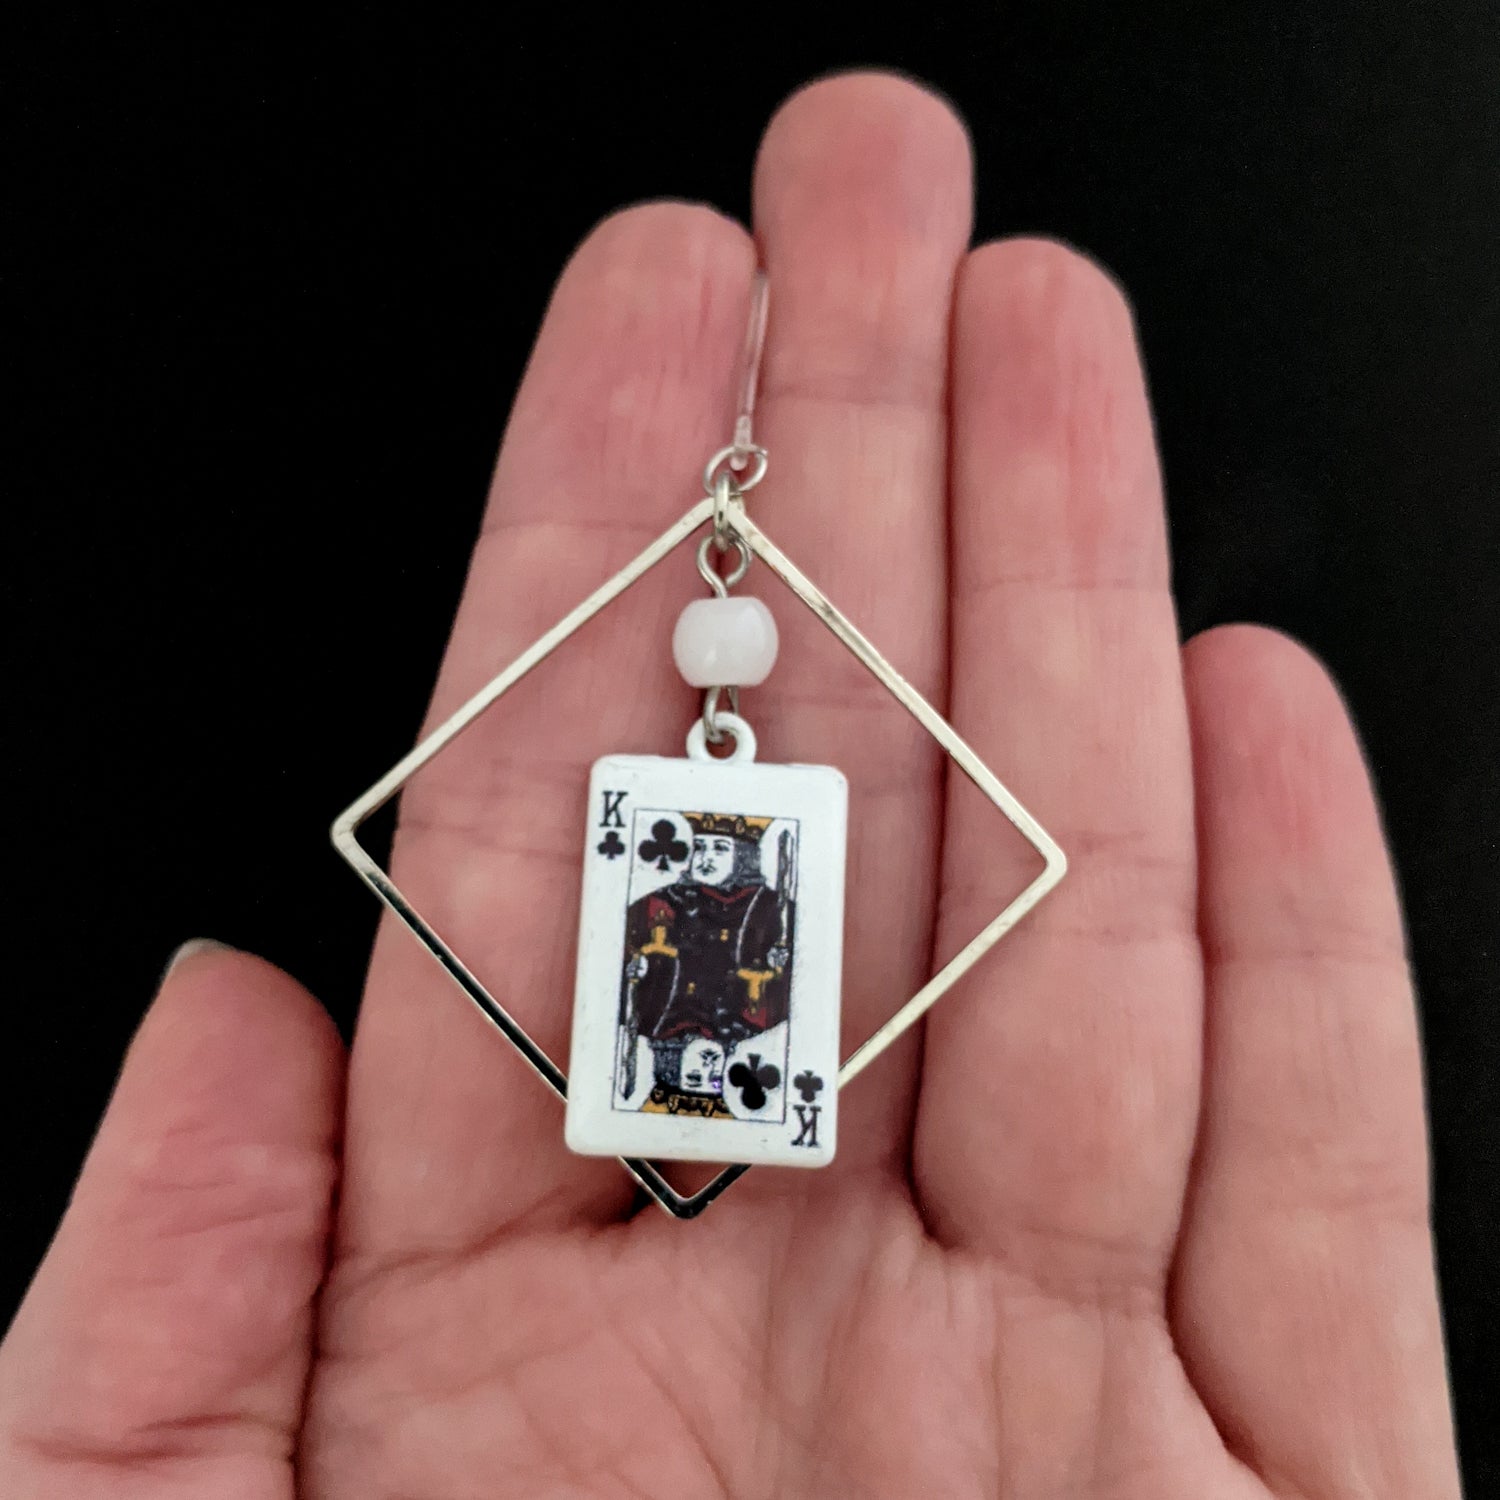 Decorative Playing Card Earrings (Dangles) - size comparison hand